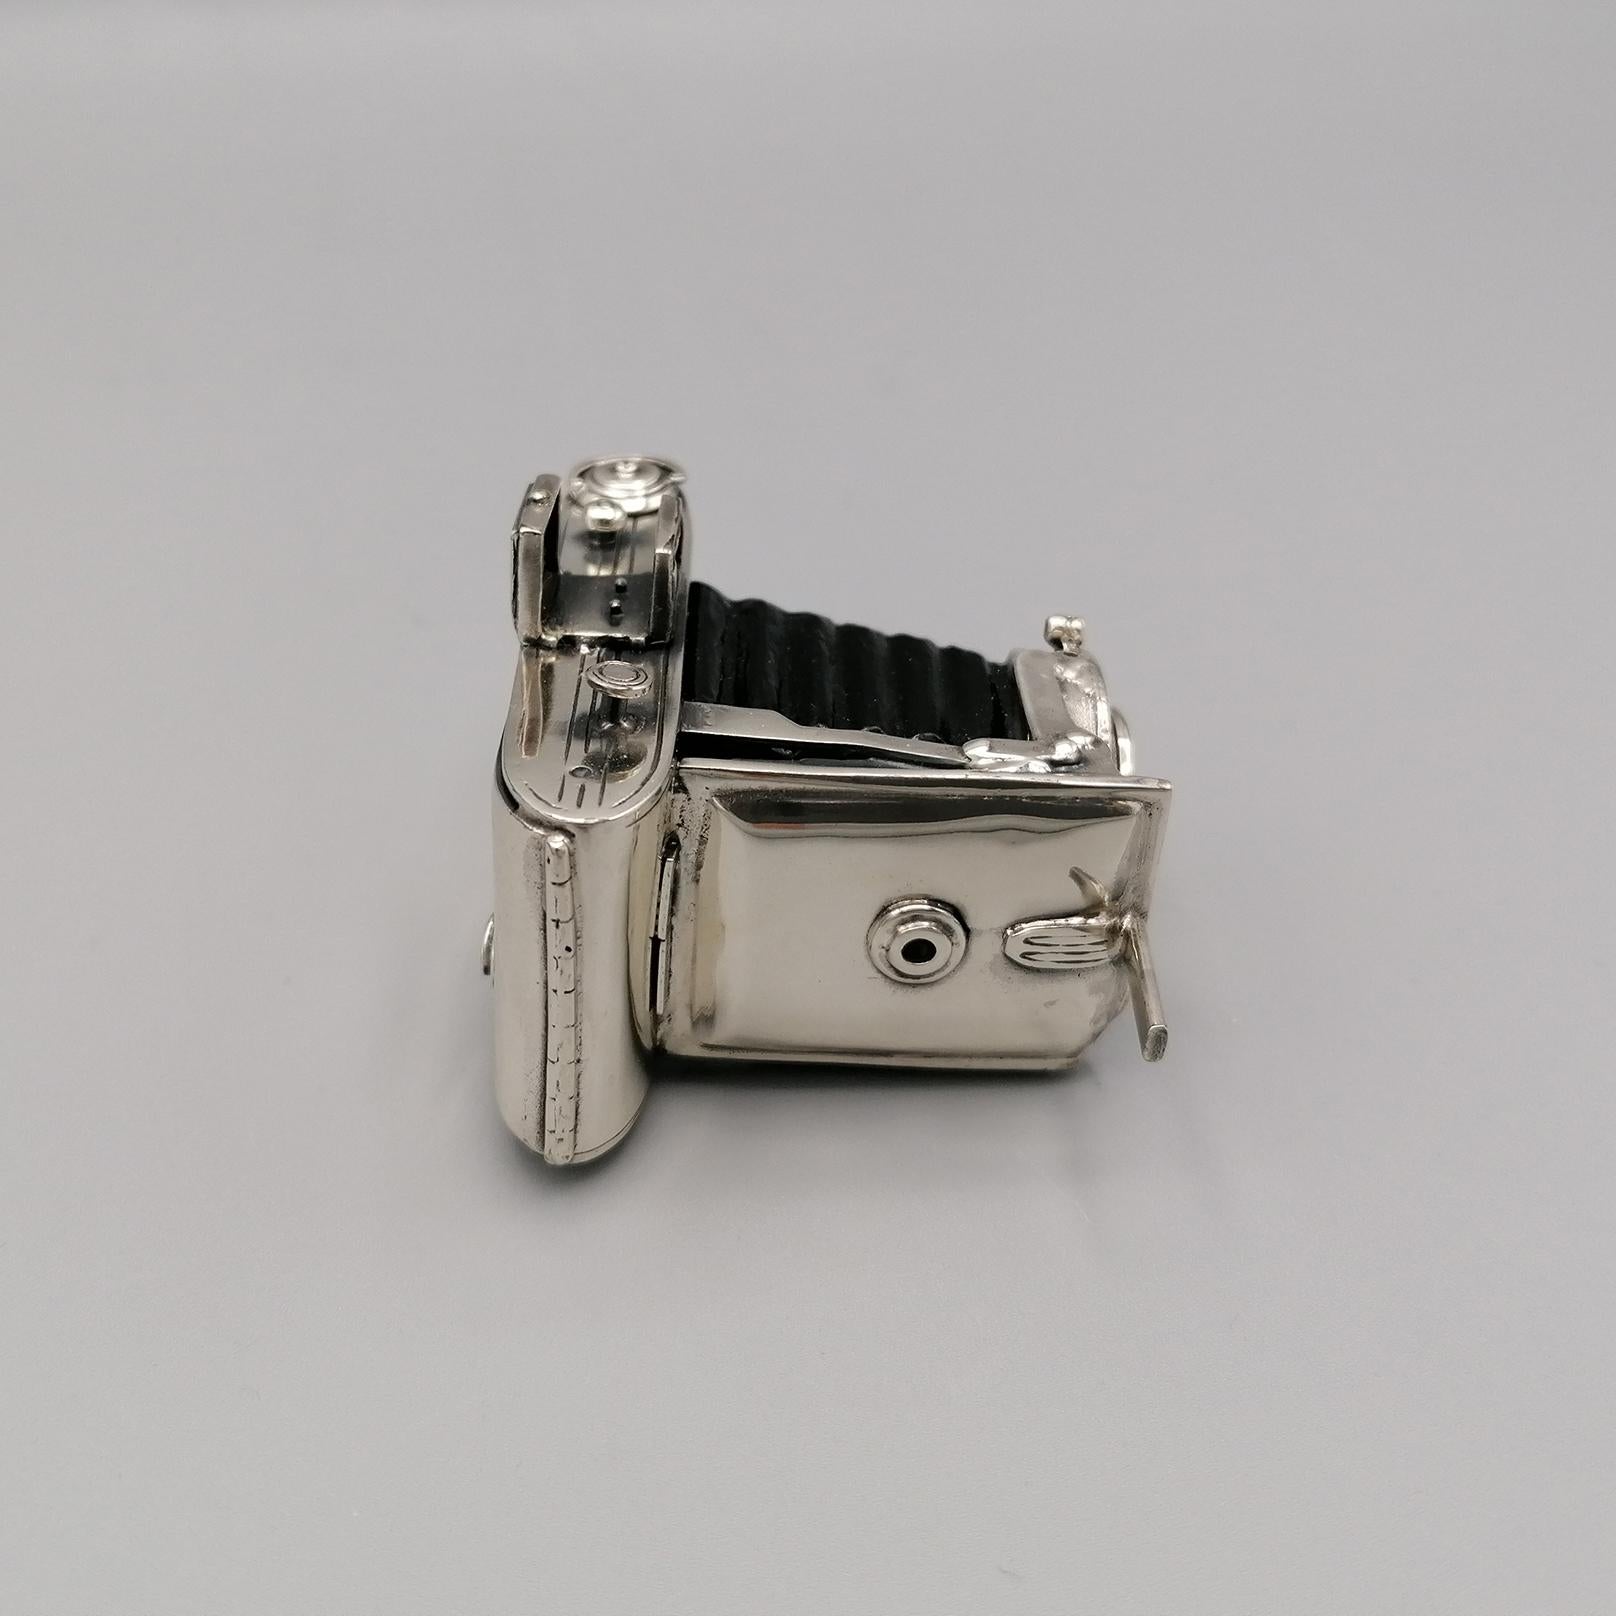 Camera miniature in sterling silver.
Completely handmade and 